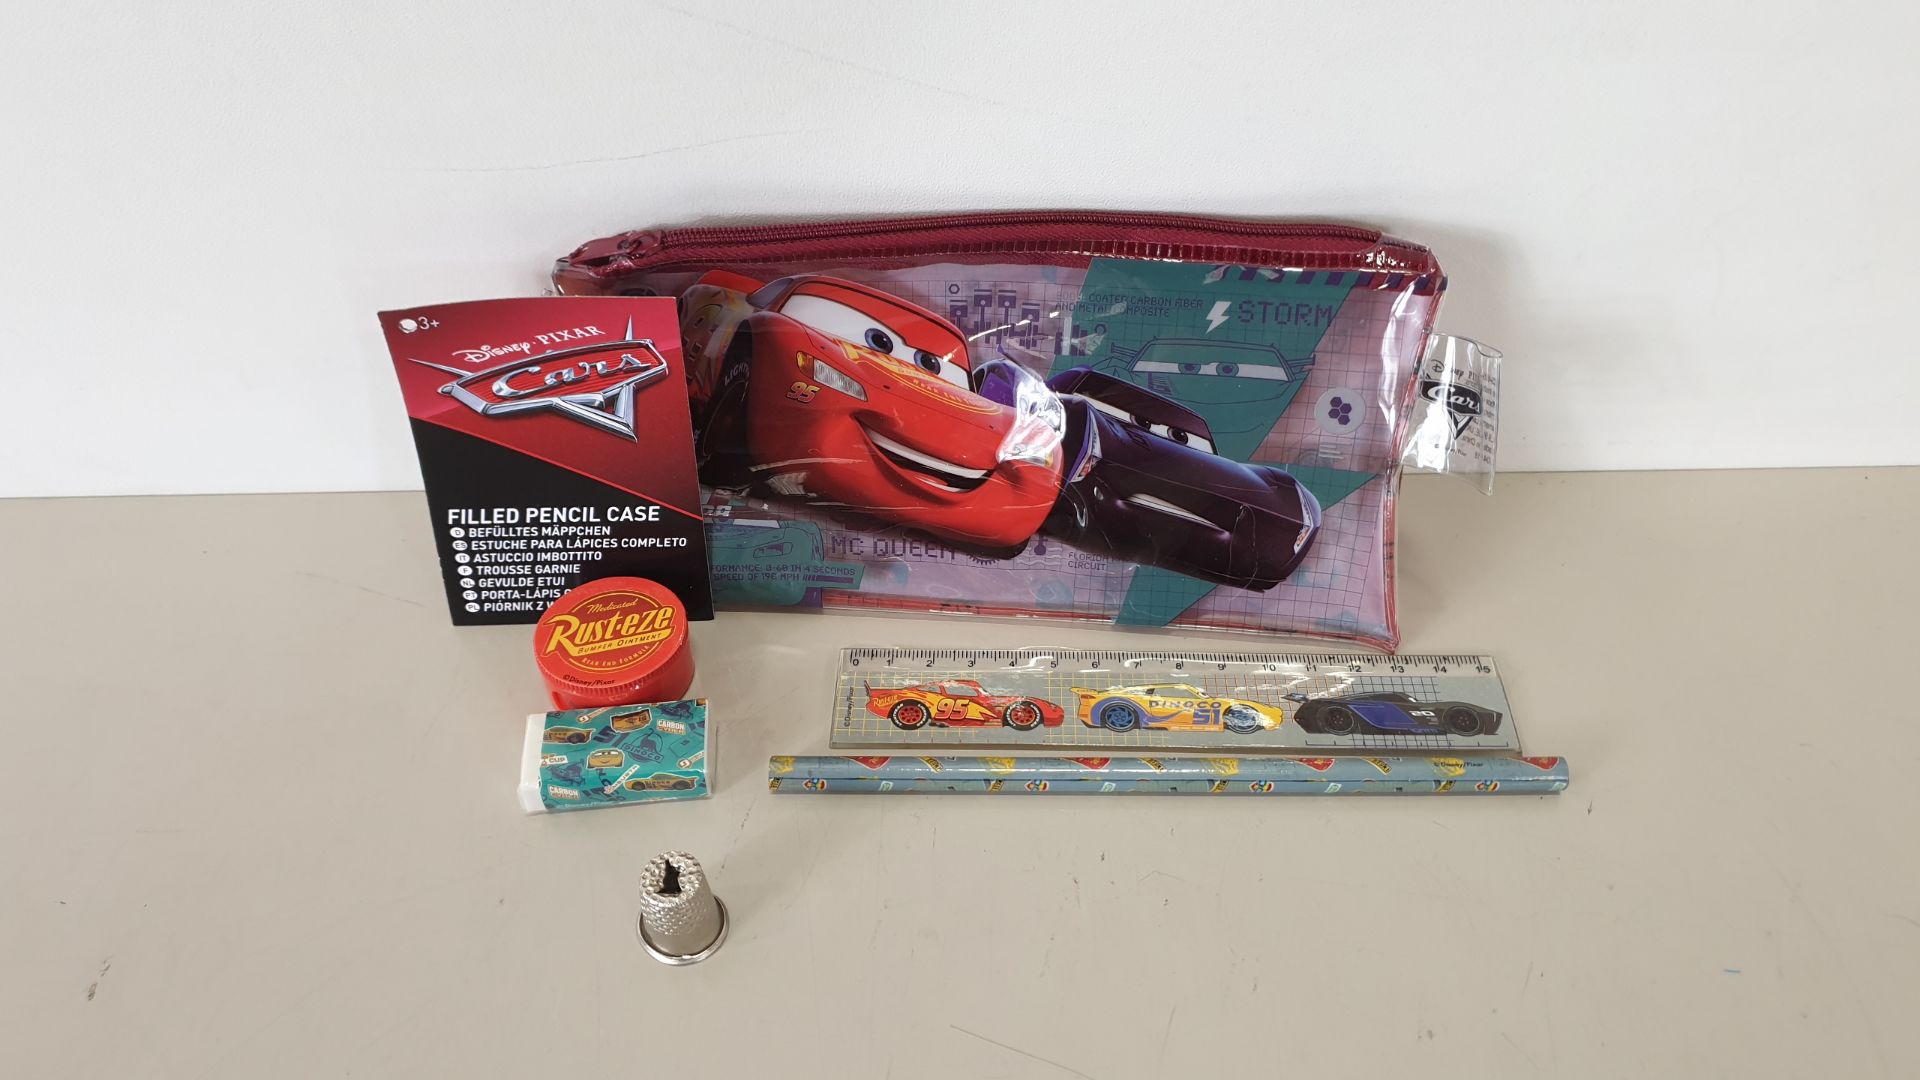 192 X BRAND NEW DISNEY PIXAR CARS FILLED PENCIL CASE COMES WITH - PENCIL, SHARPNER, RUBBER AND RULER